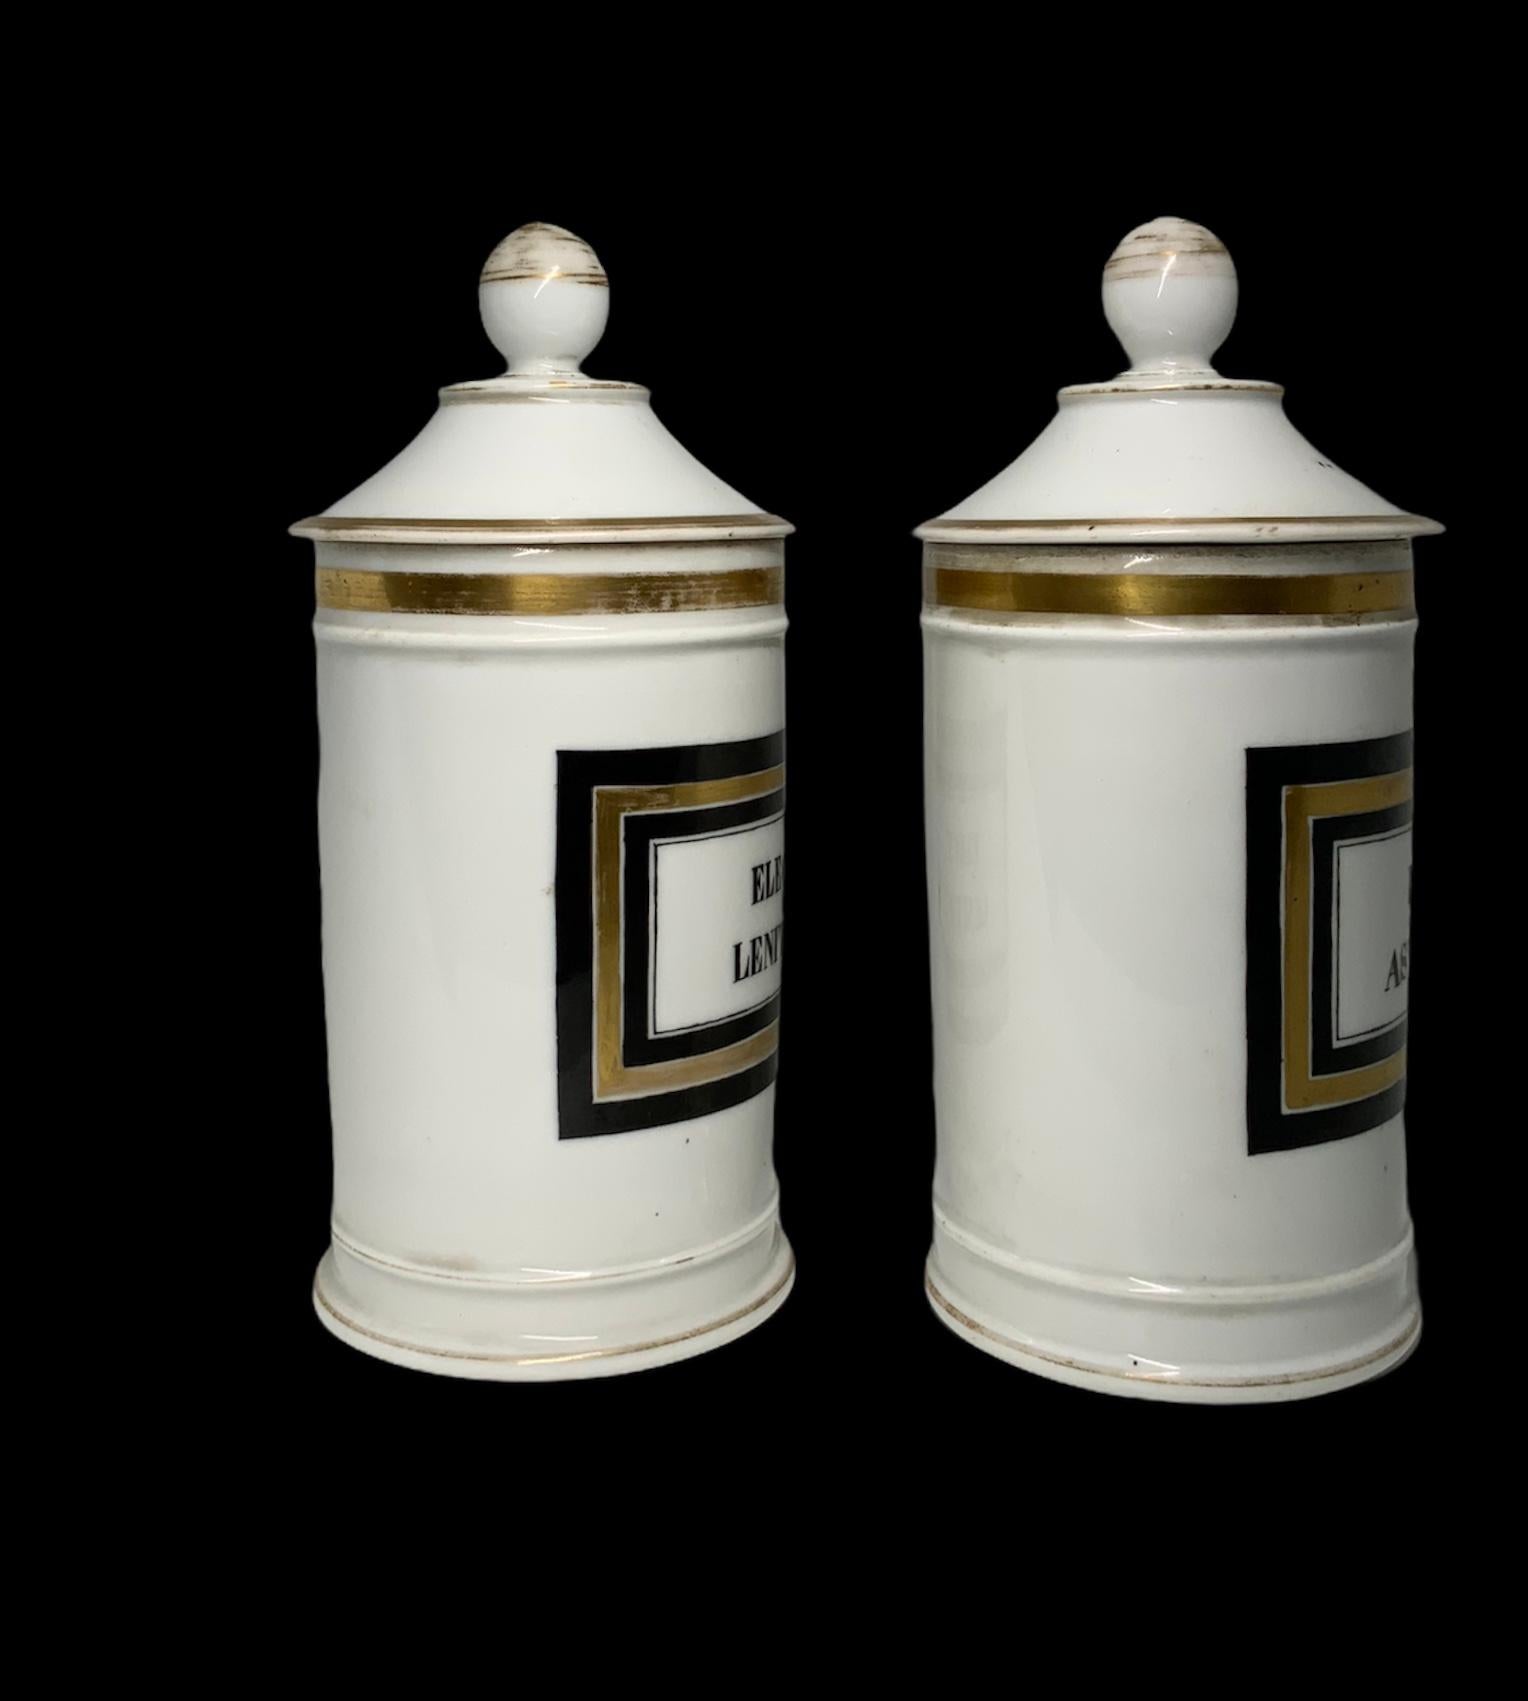 Vintage lidded pharmacy canister 2 Antique German white porcelain apothecary storage jars